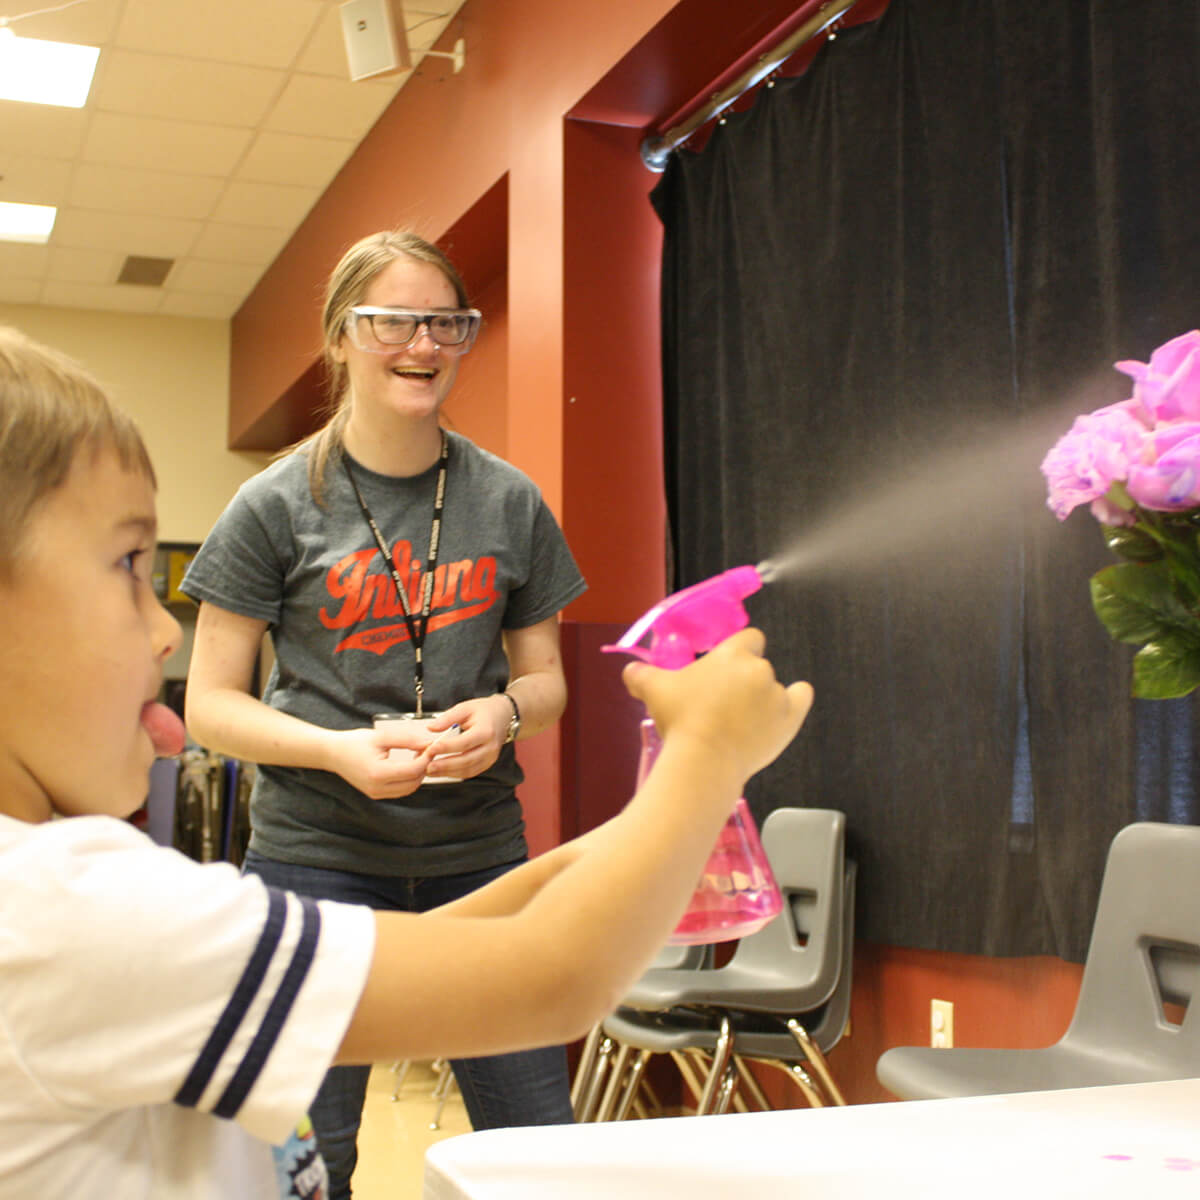 A volunteer laughs as a child sprays a vase of flowers during a field trip to Wonderlab